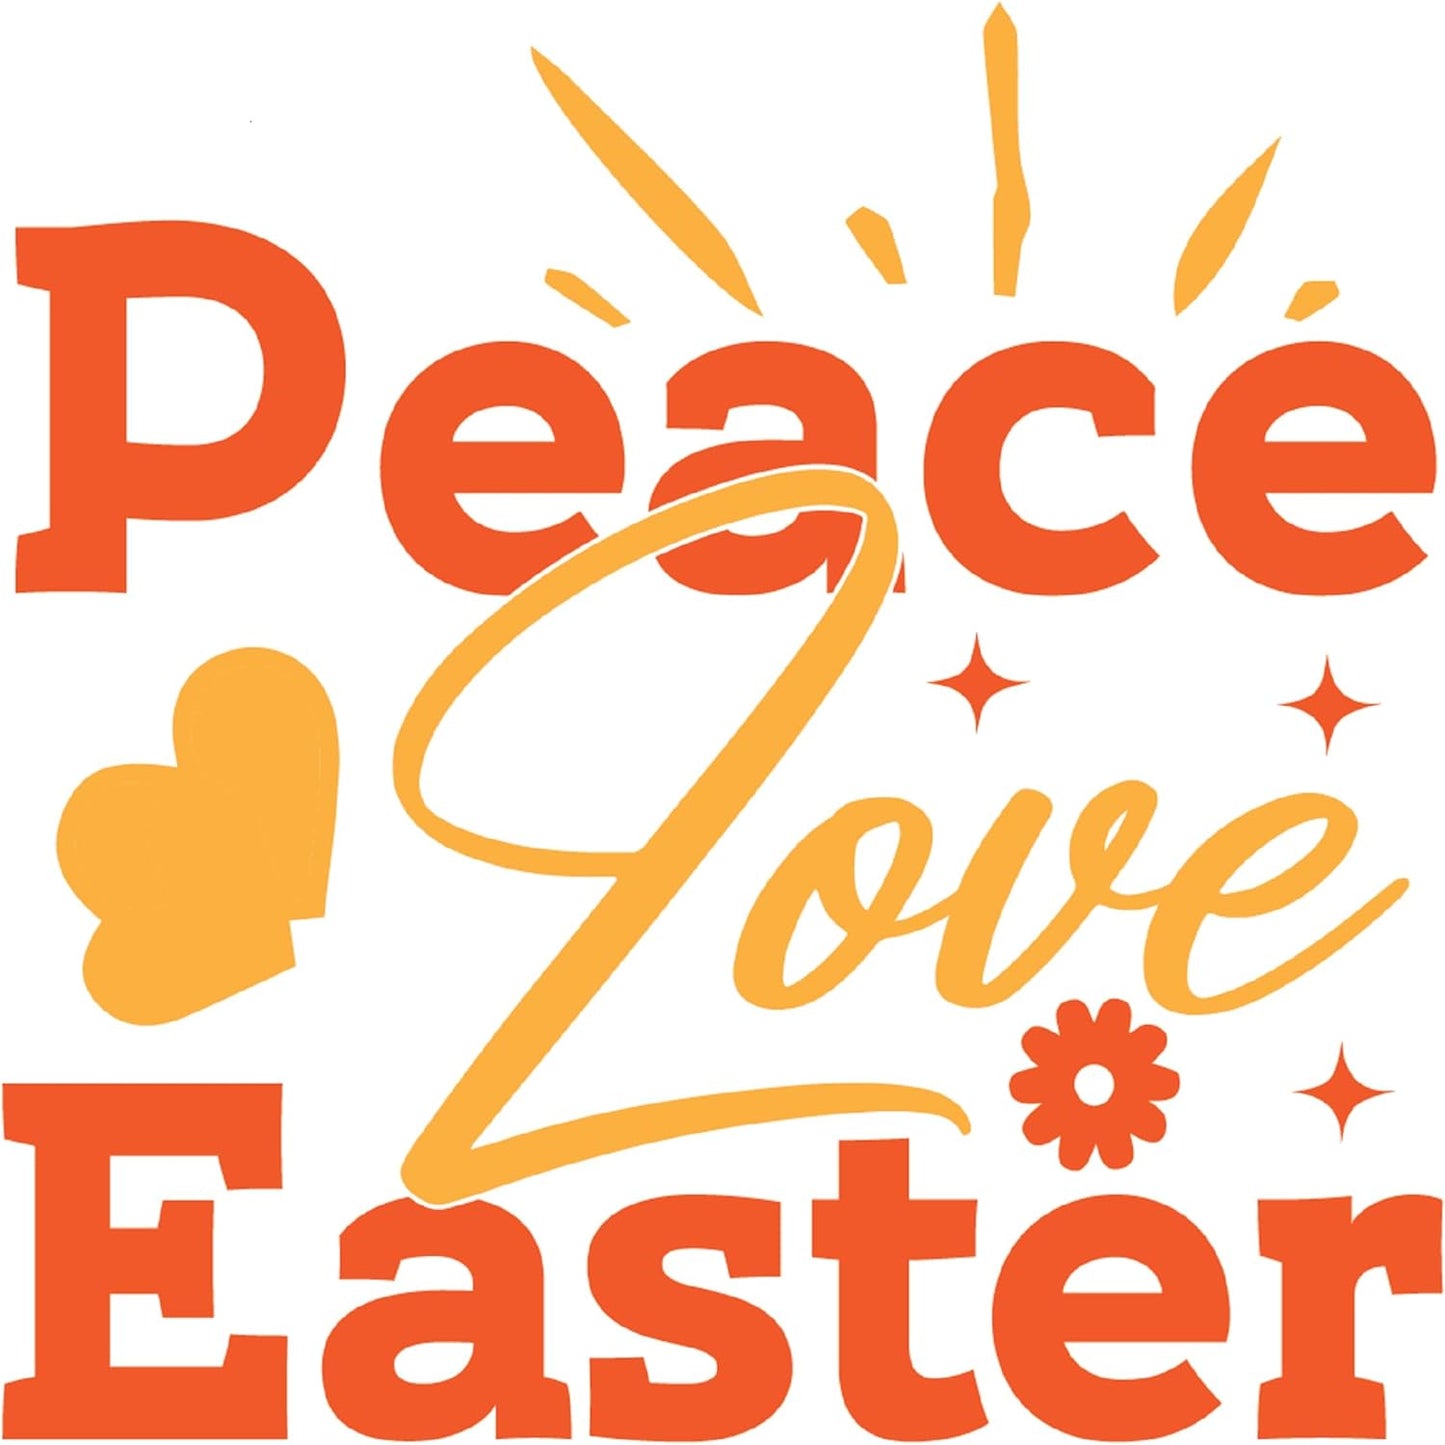 Inspirational Quote "Peace Love Easter" Motivational Sticker Vinyl Decal Motivation Stickers- 5" Vinyl Sticker Waterproof